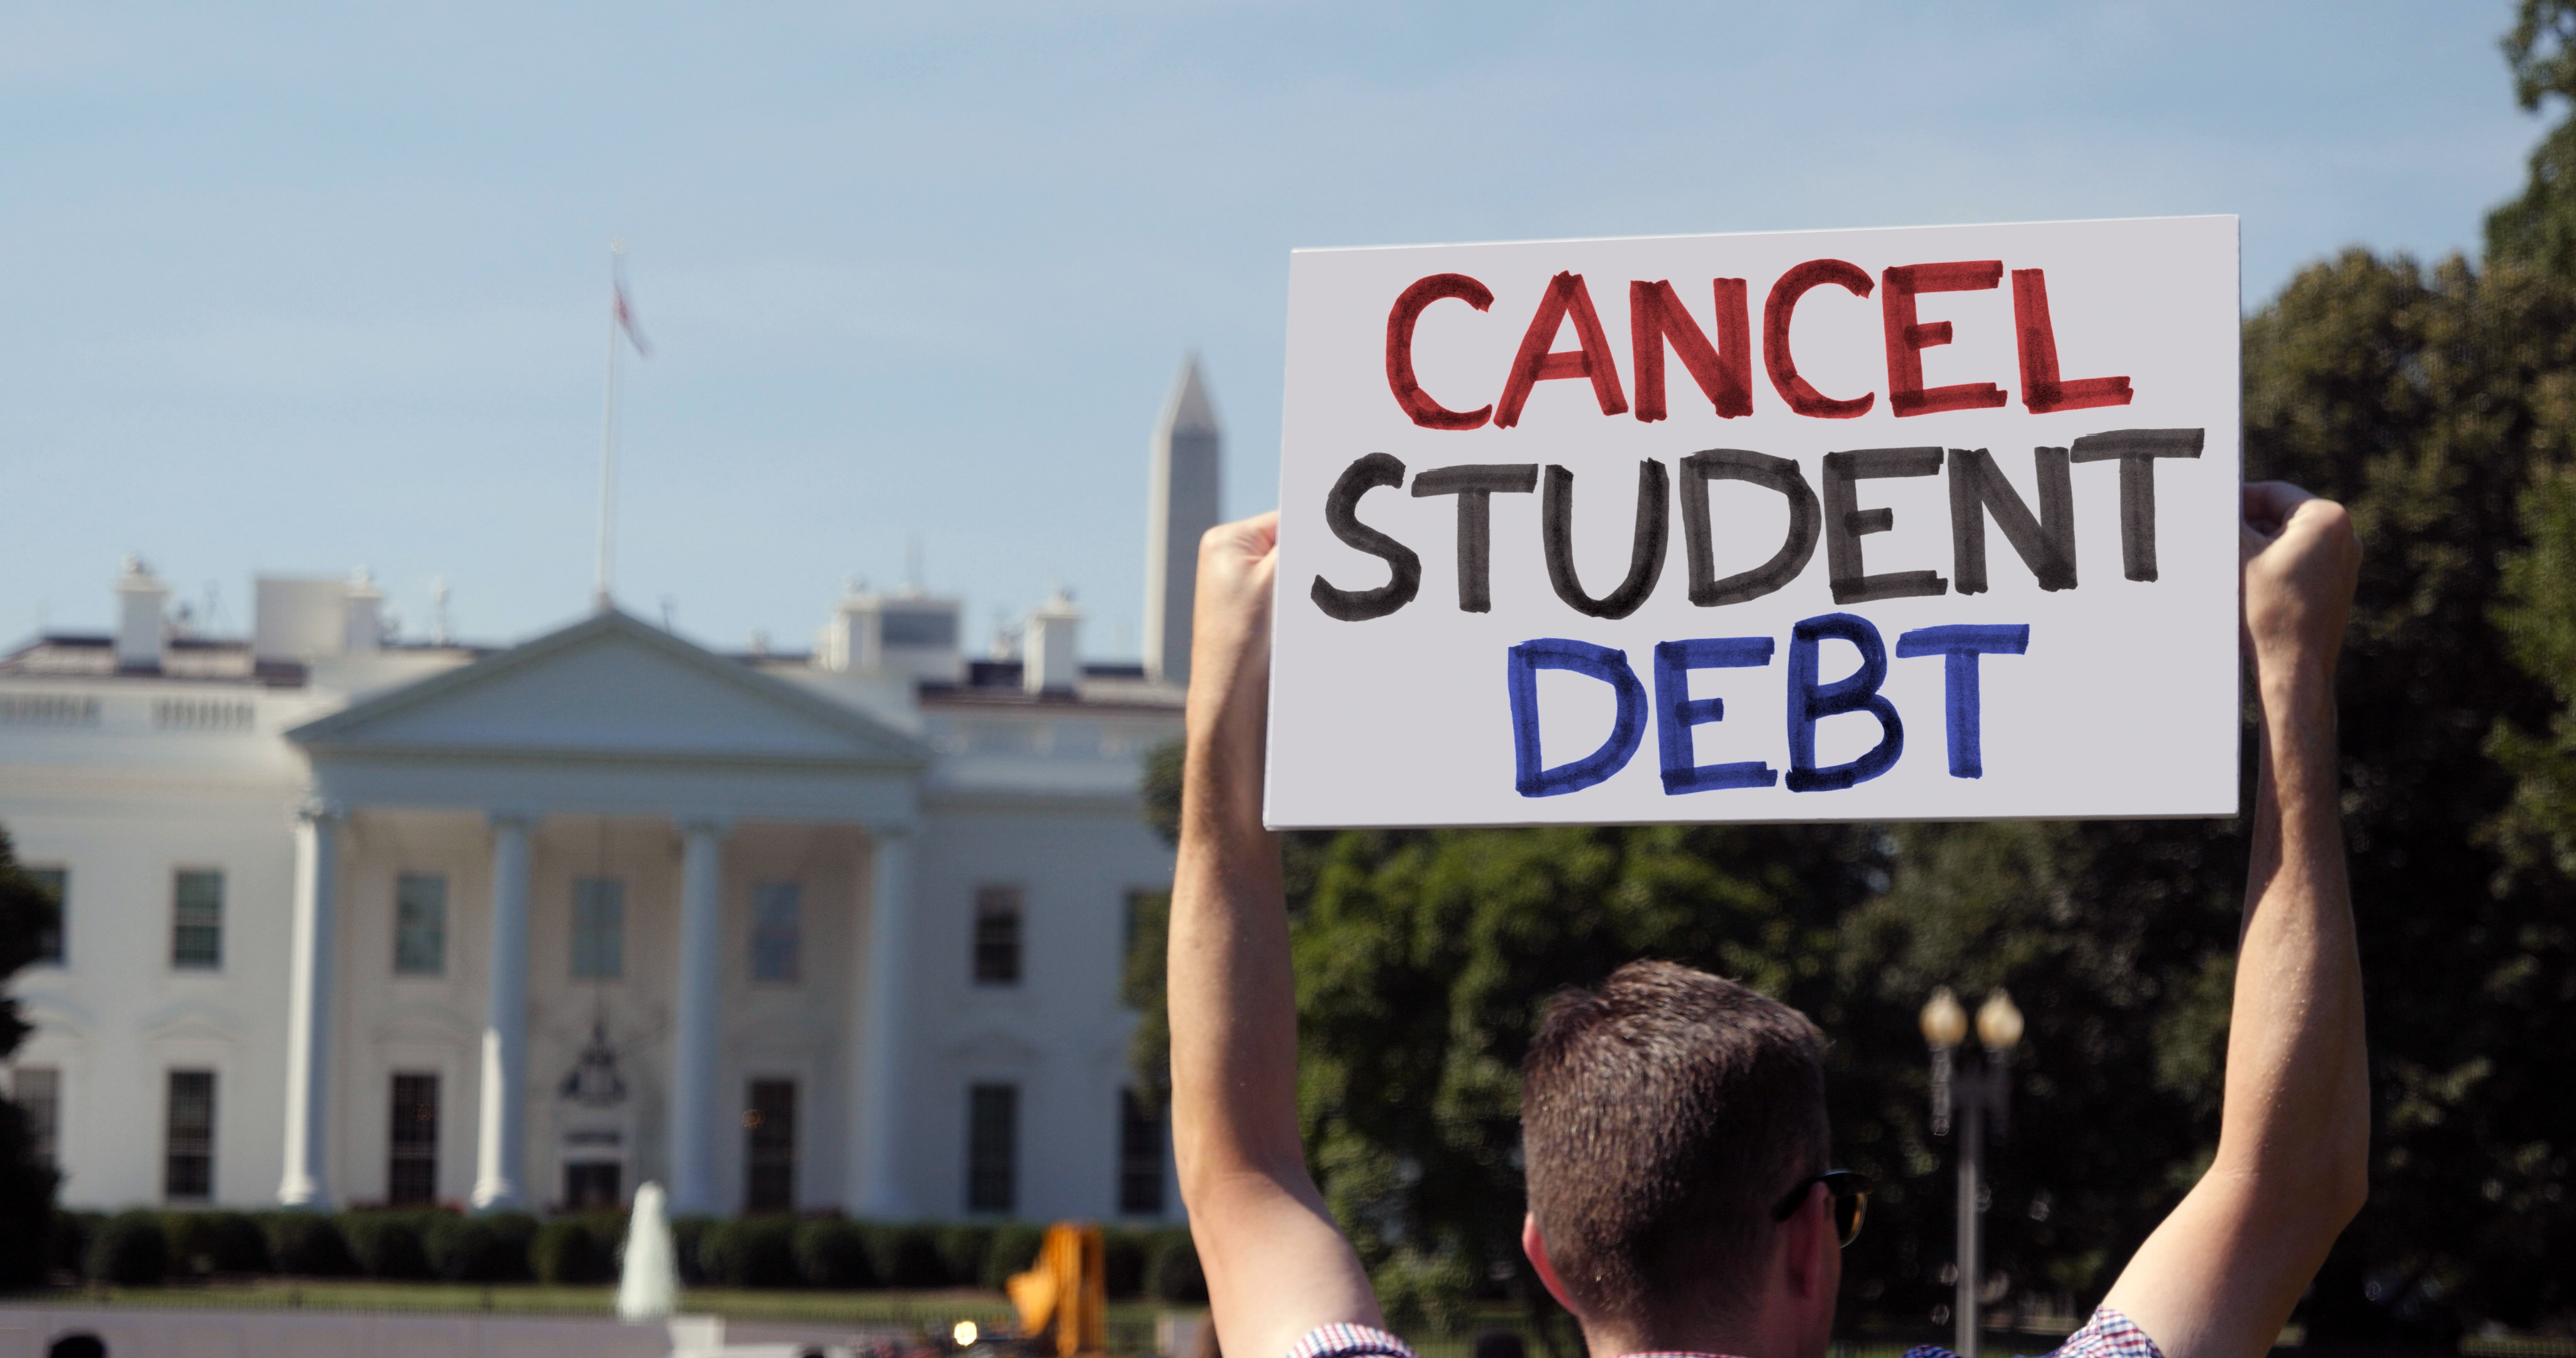 A man holds a cancel student debt sign in front of the White House